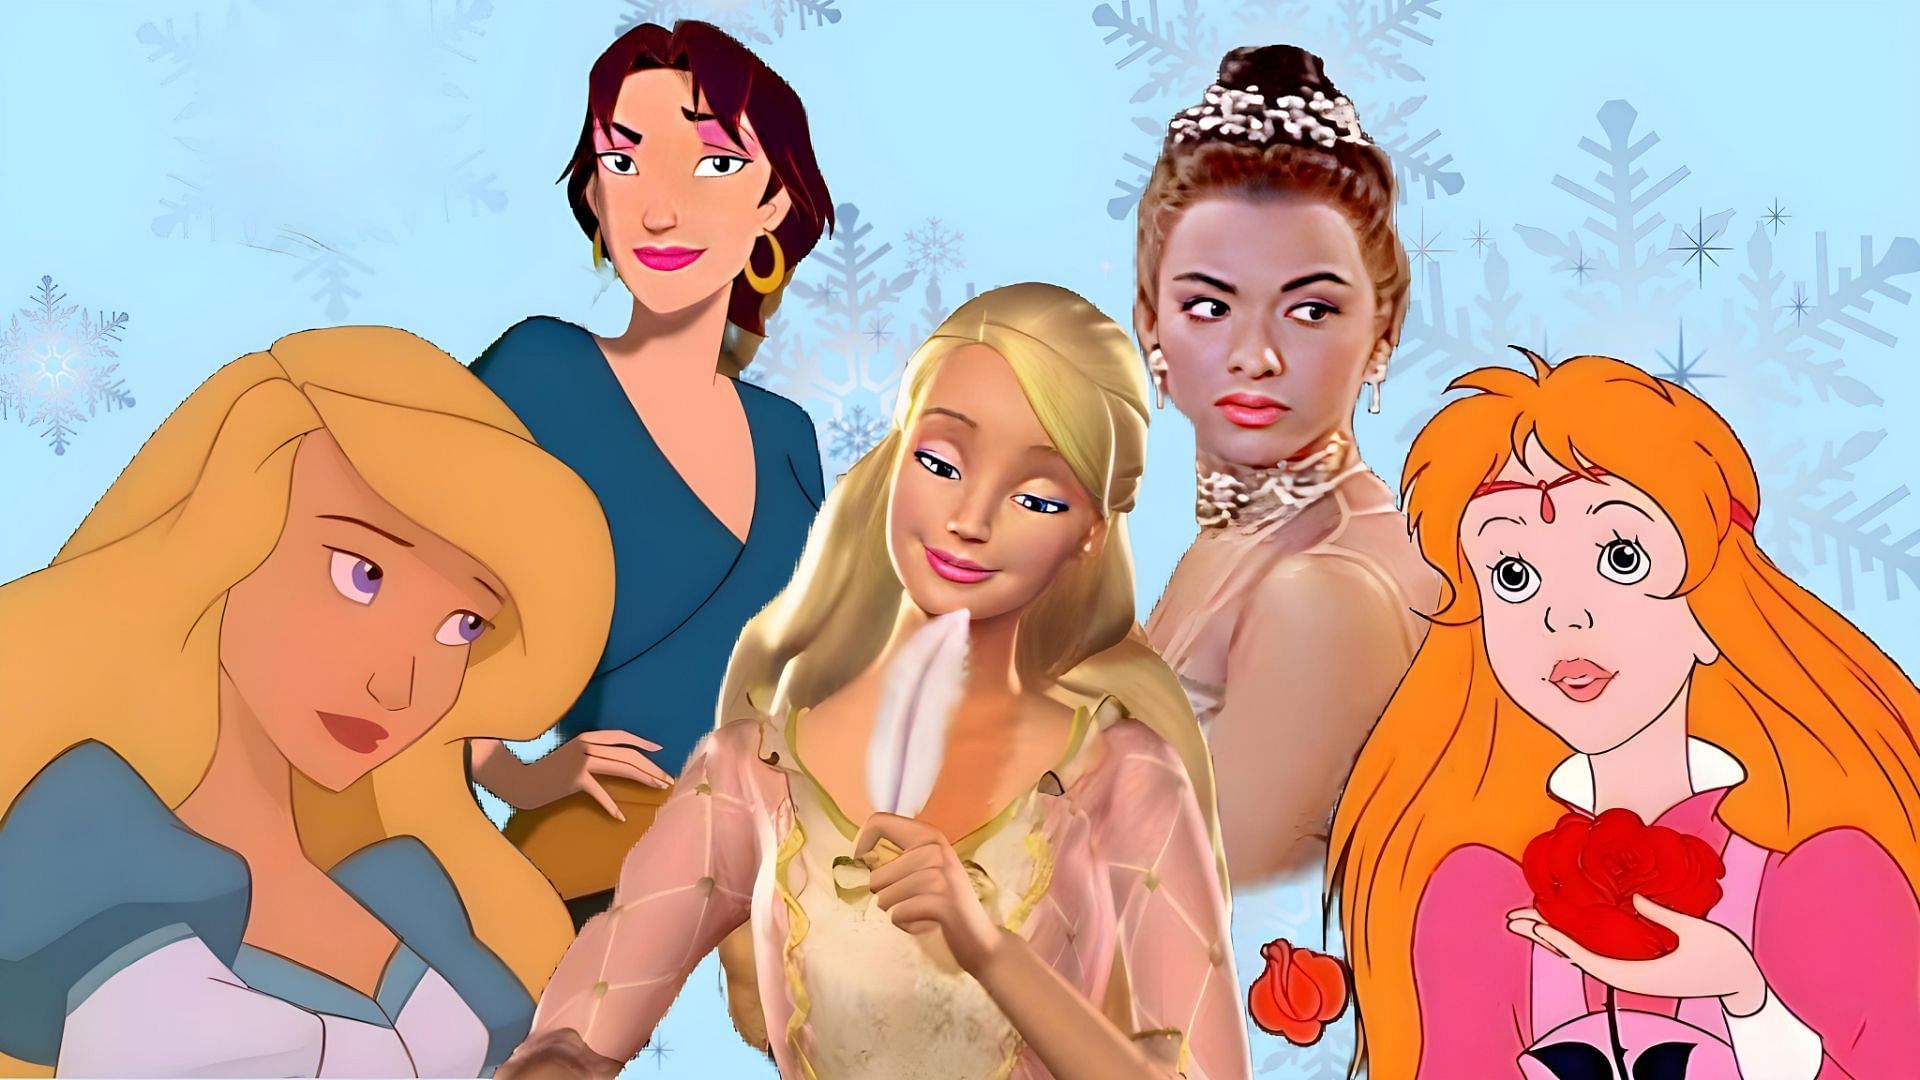 the influence of these non-Disney princesses on culture is quite significant. (Image via Sportskeeda)